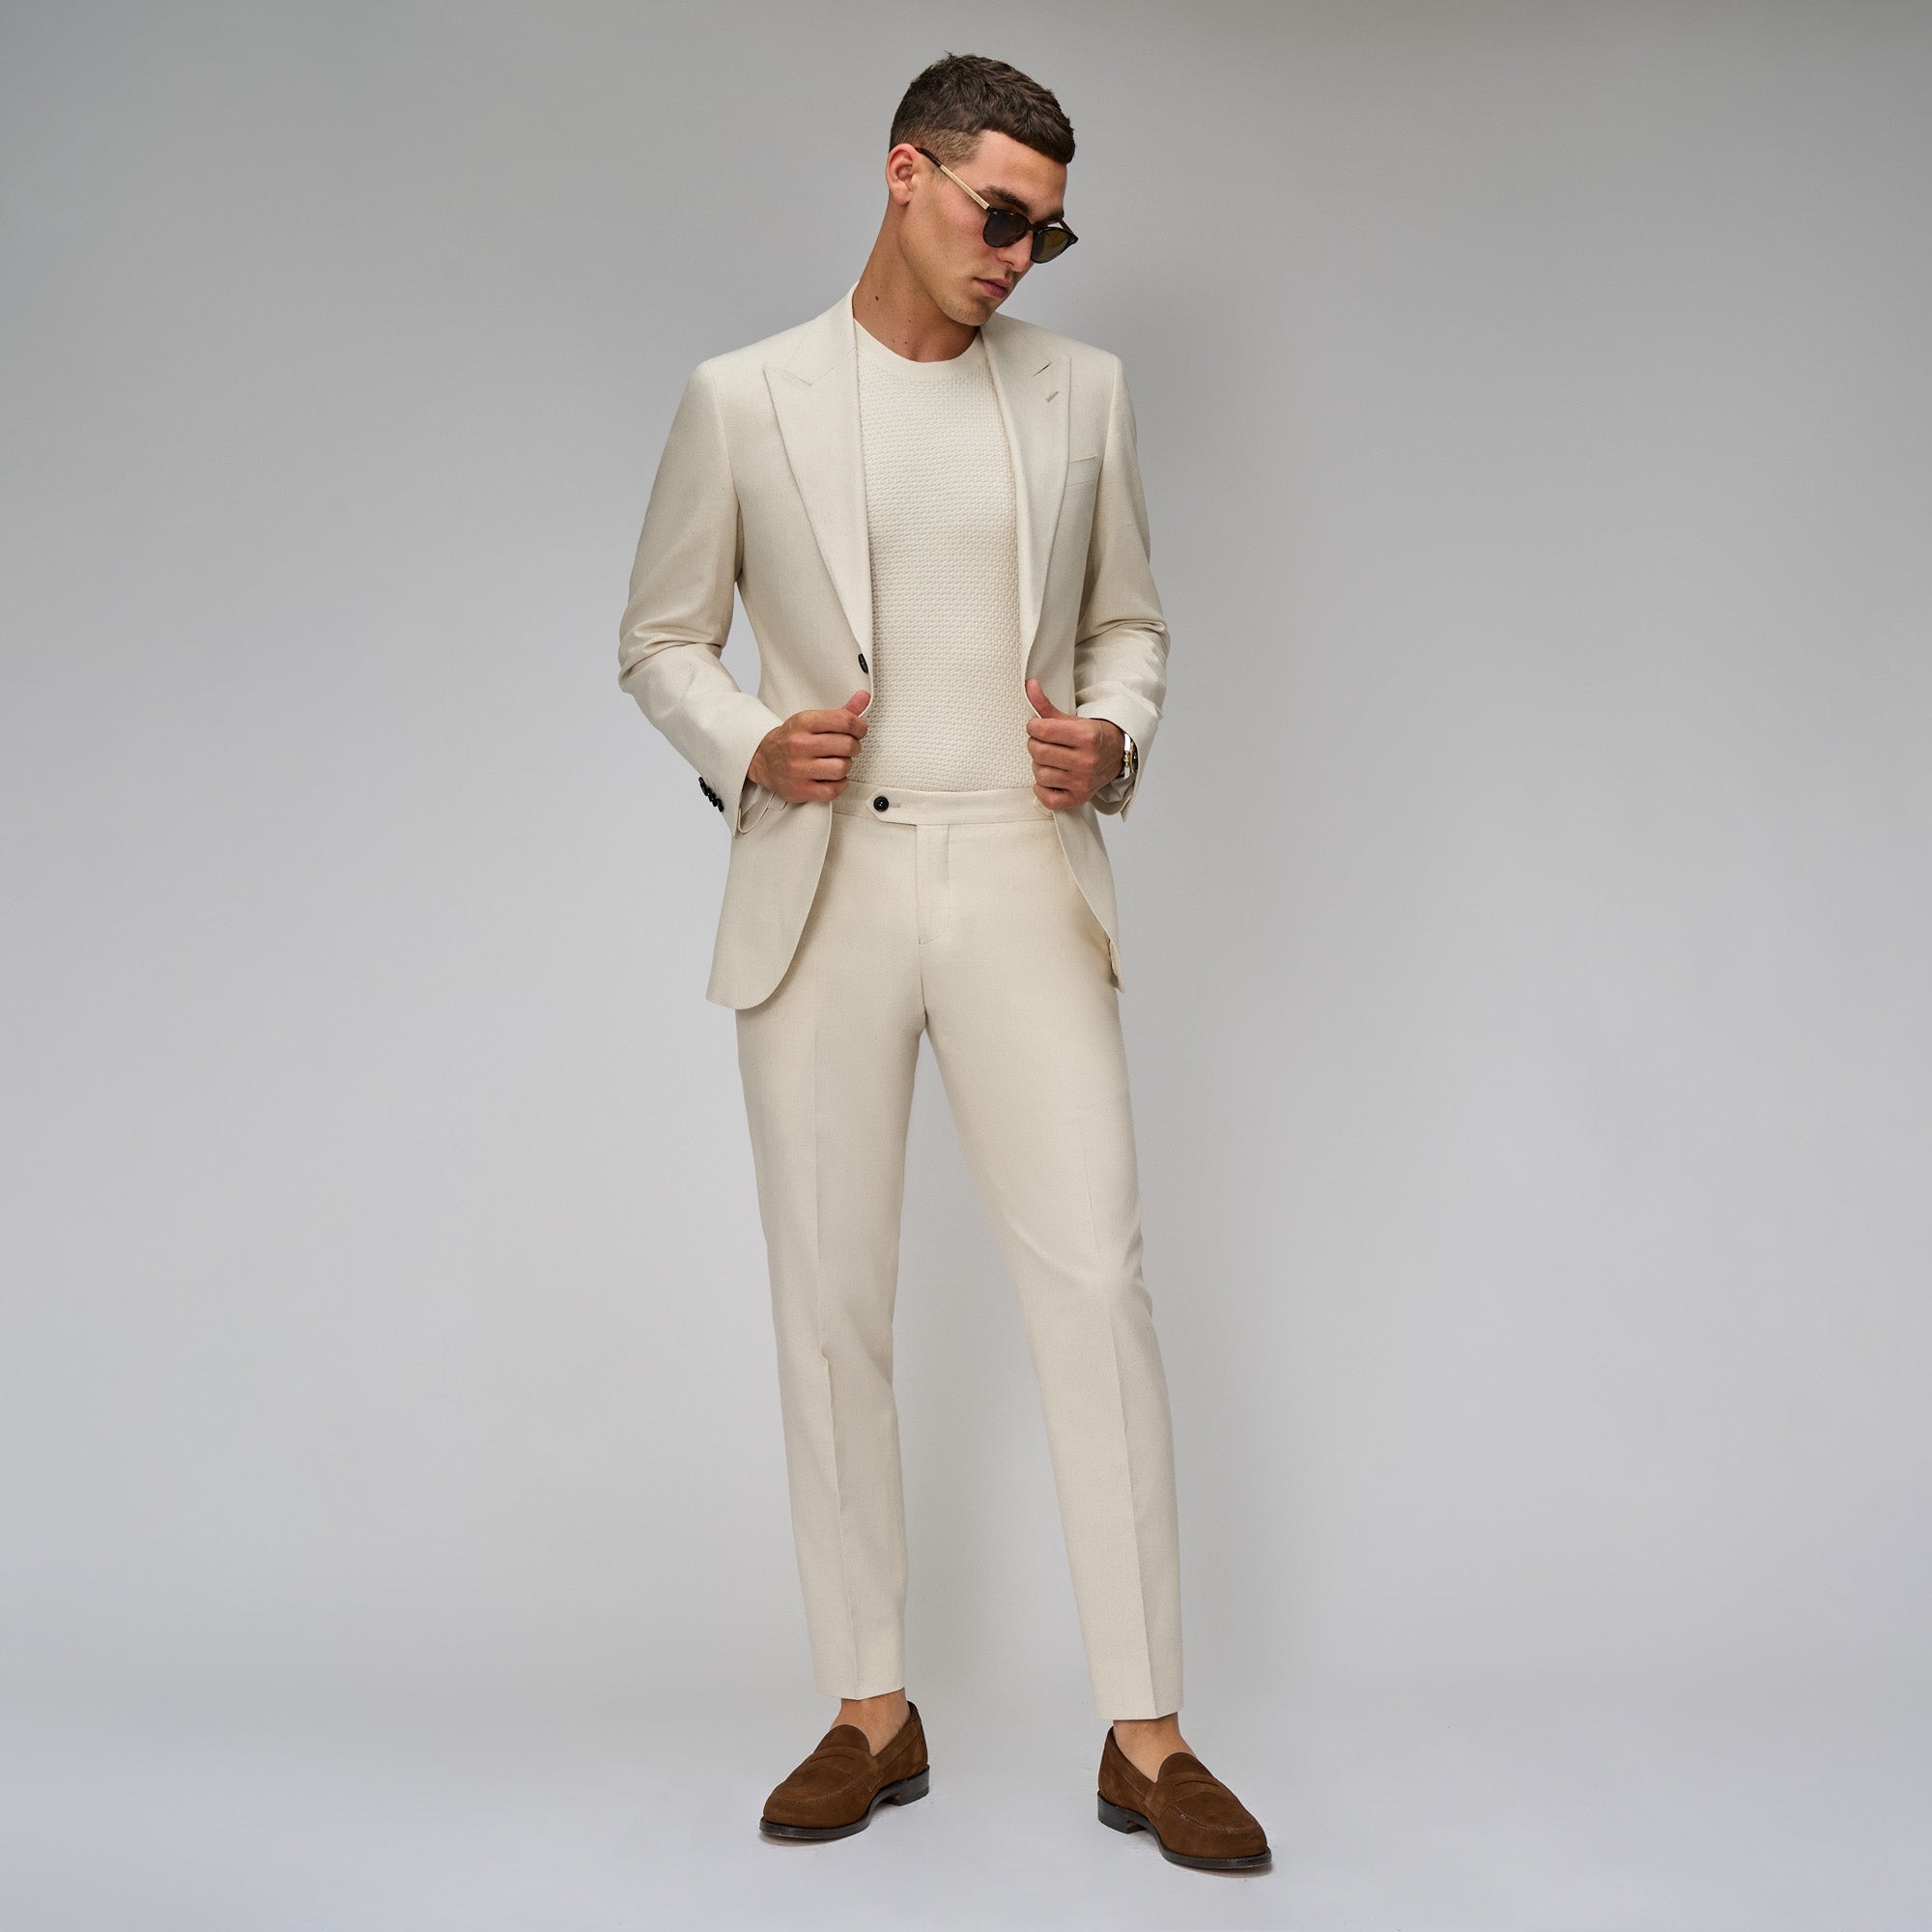 Beige Linen Suit with White Shirt